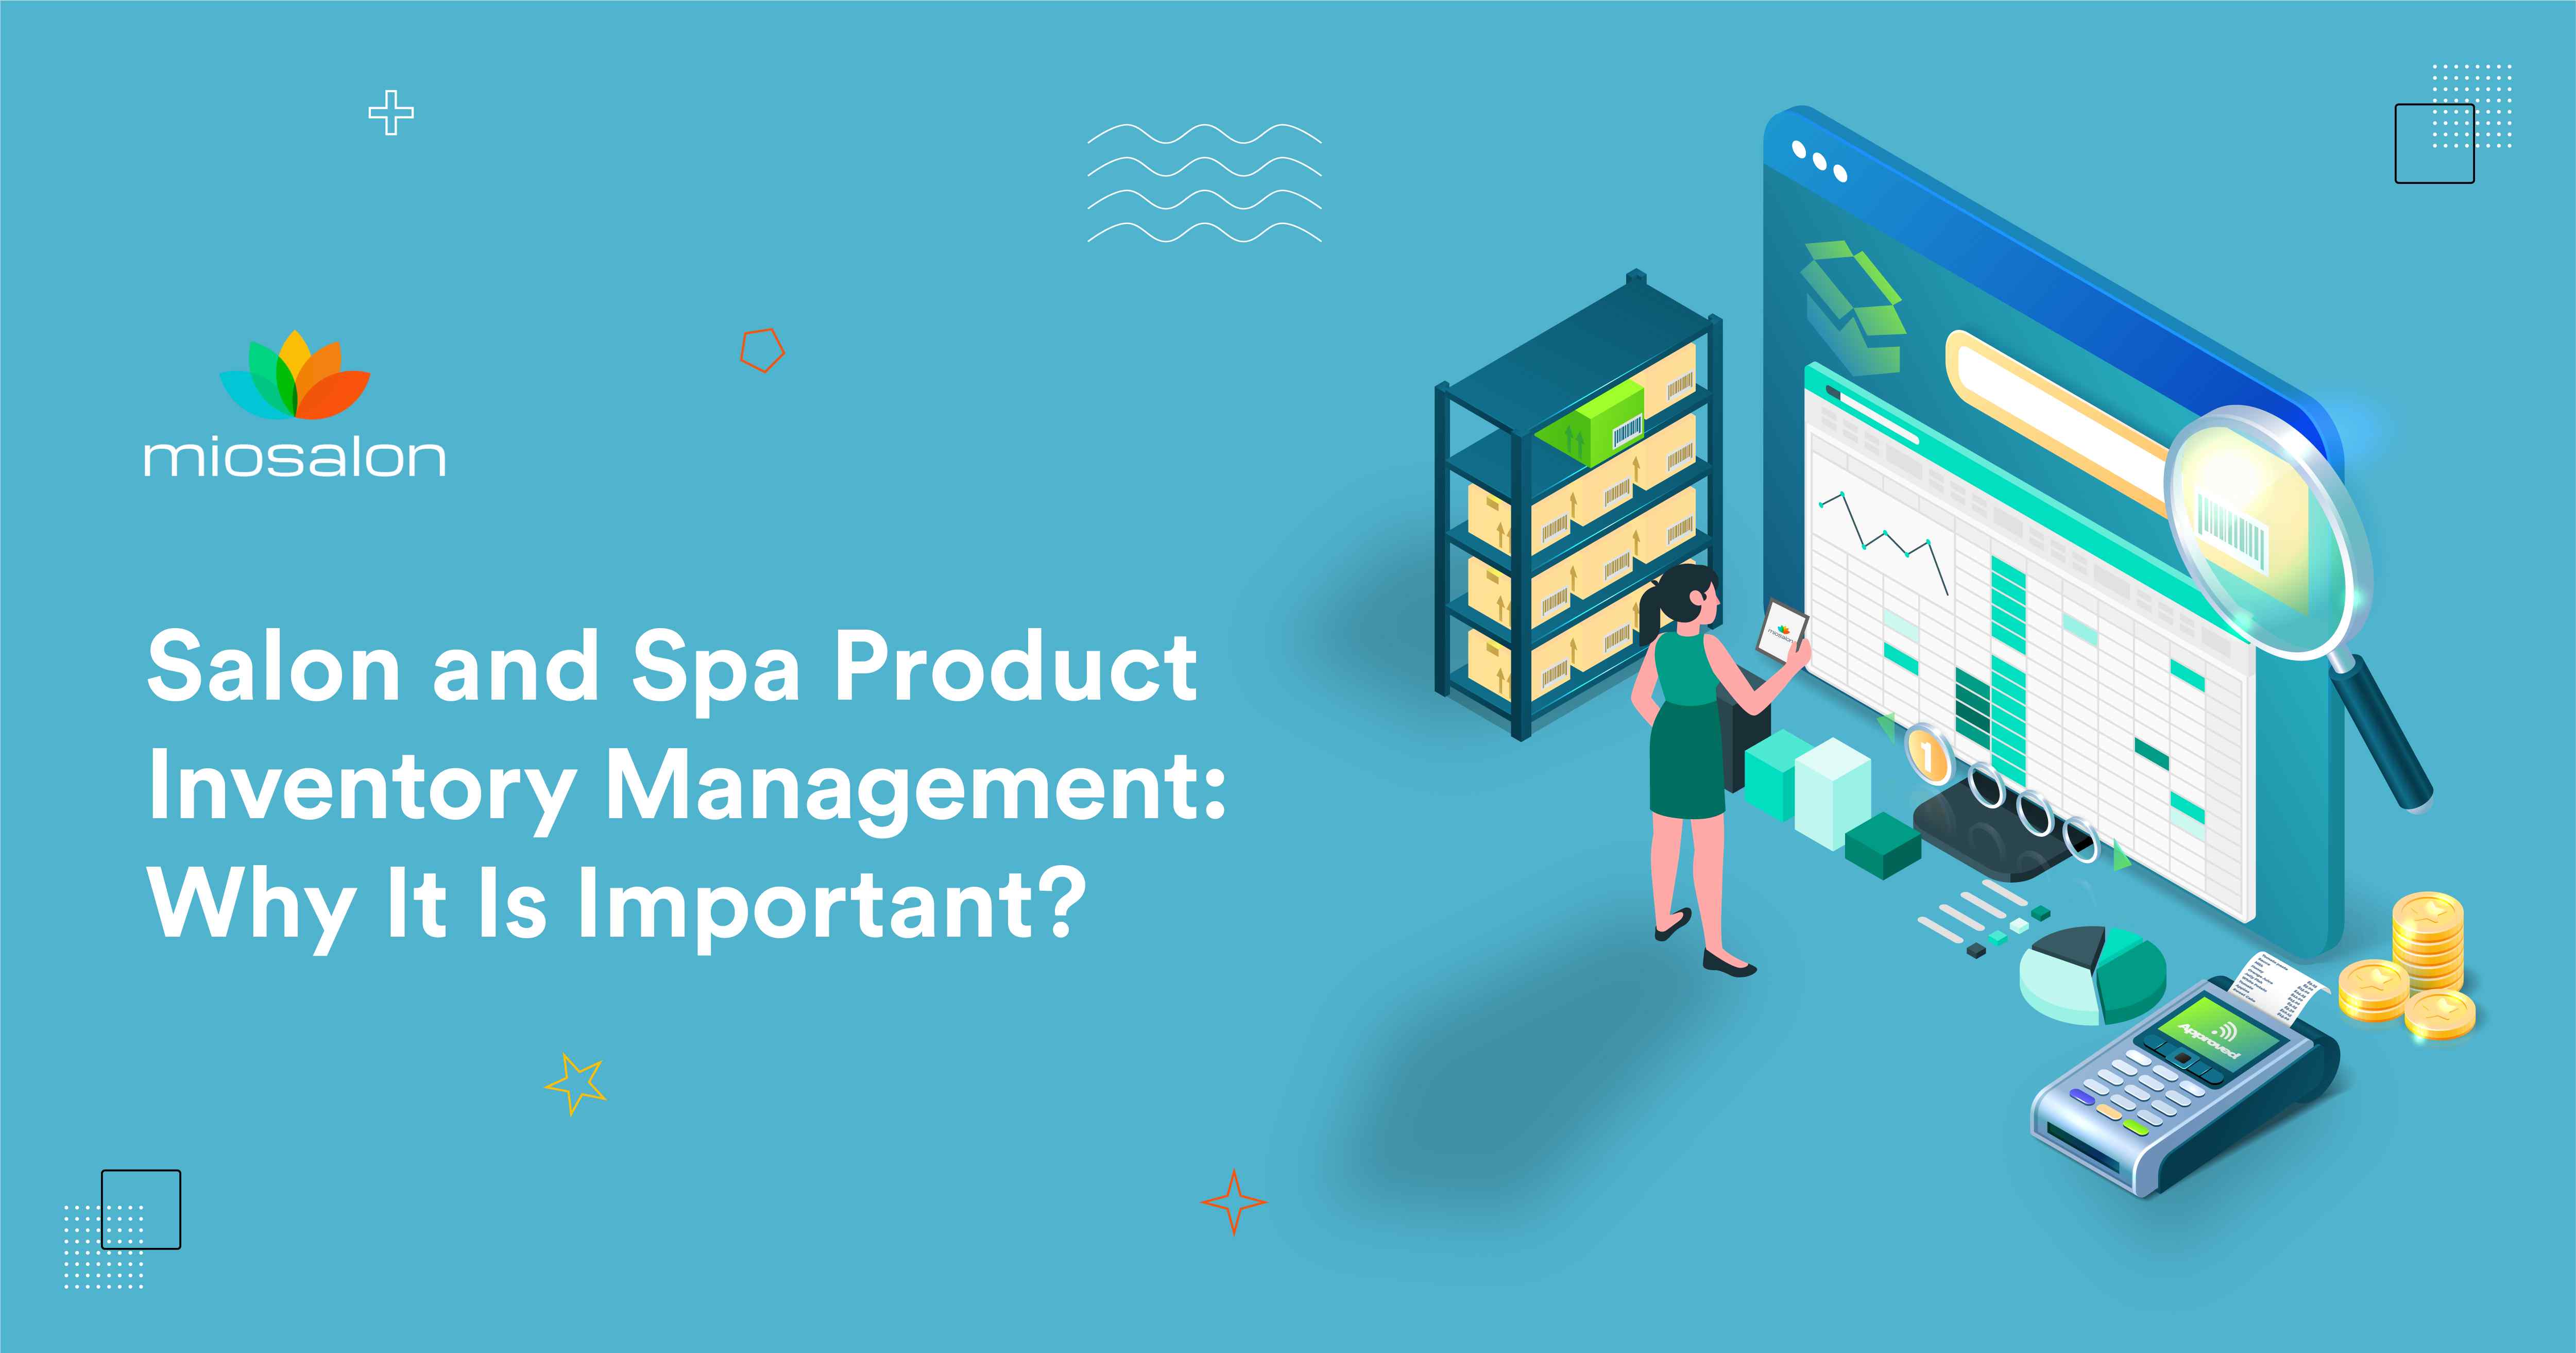 Salon and Spa Product Inventory Management